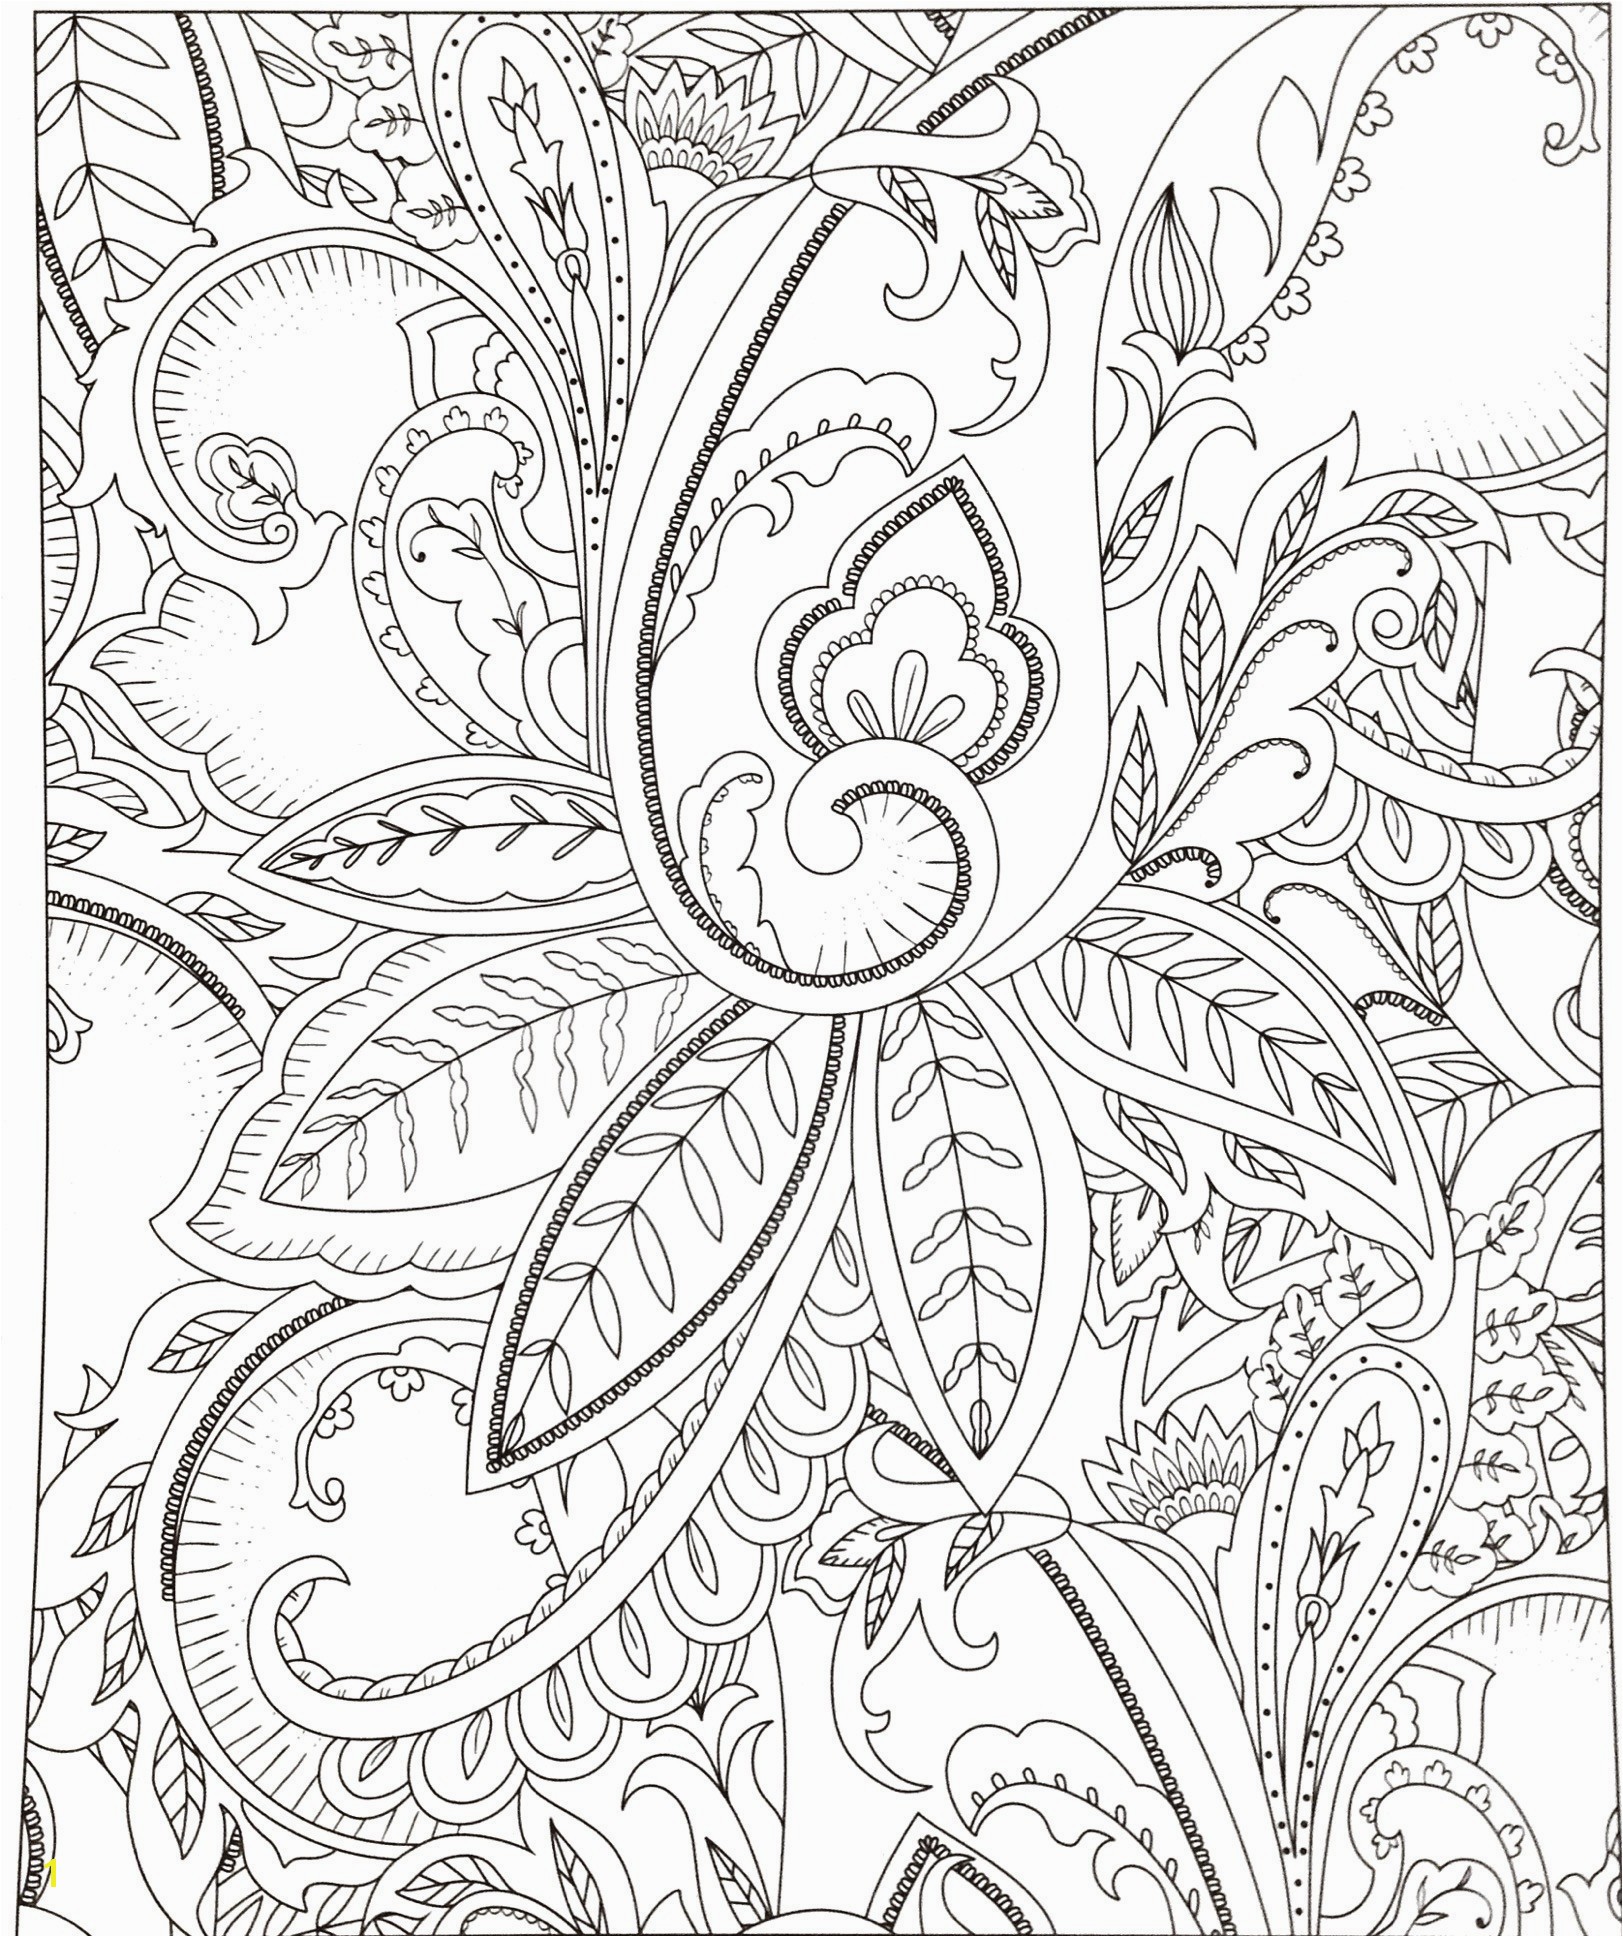 Ananias and Sapphira Coloring Page 15 Best Ananias and Sapphira Coloring Page Image